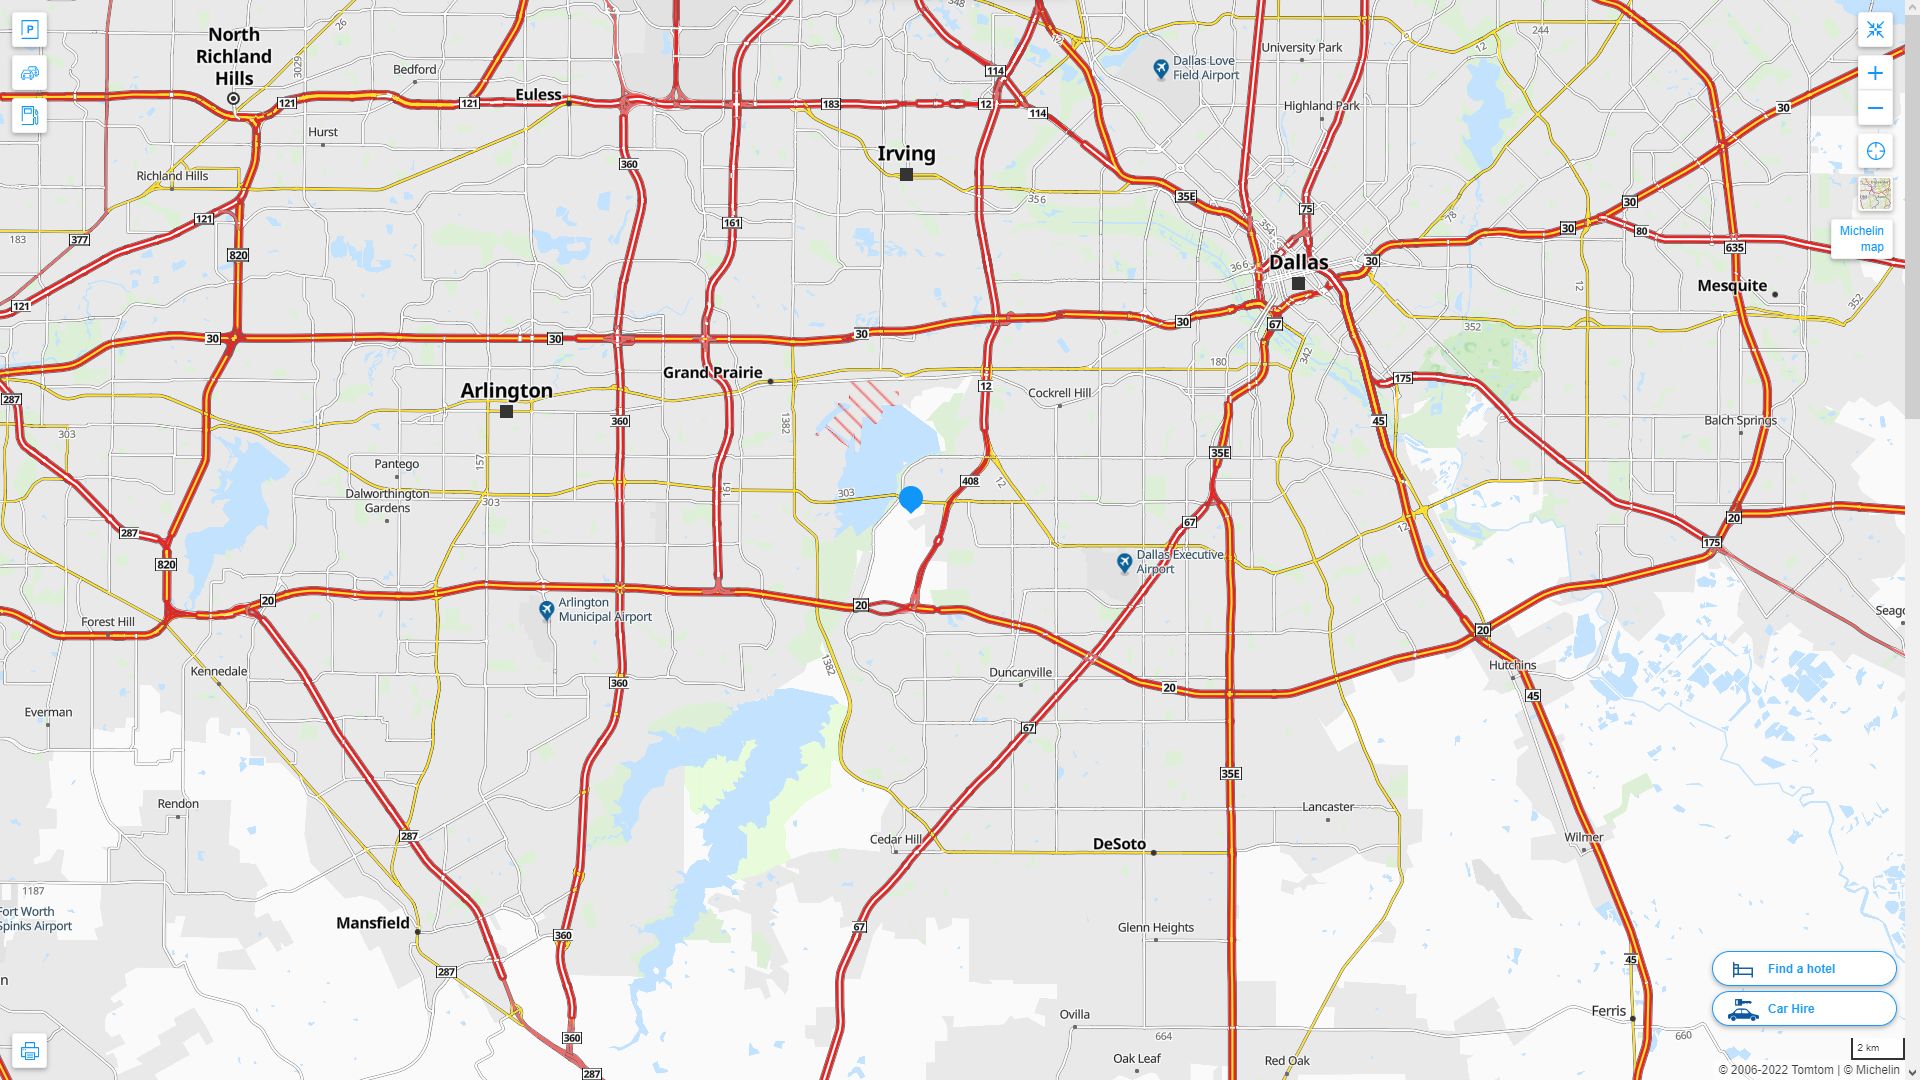 Grand Prairie Texas Highway and Road Map